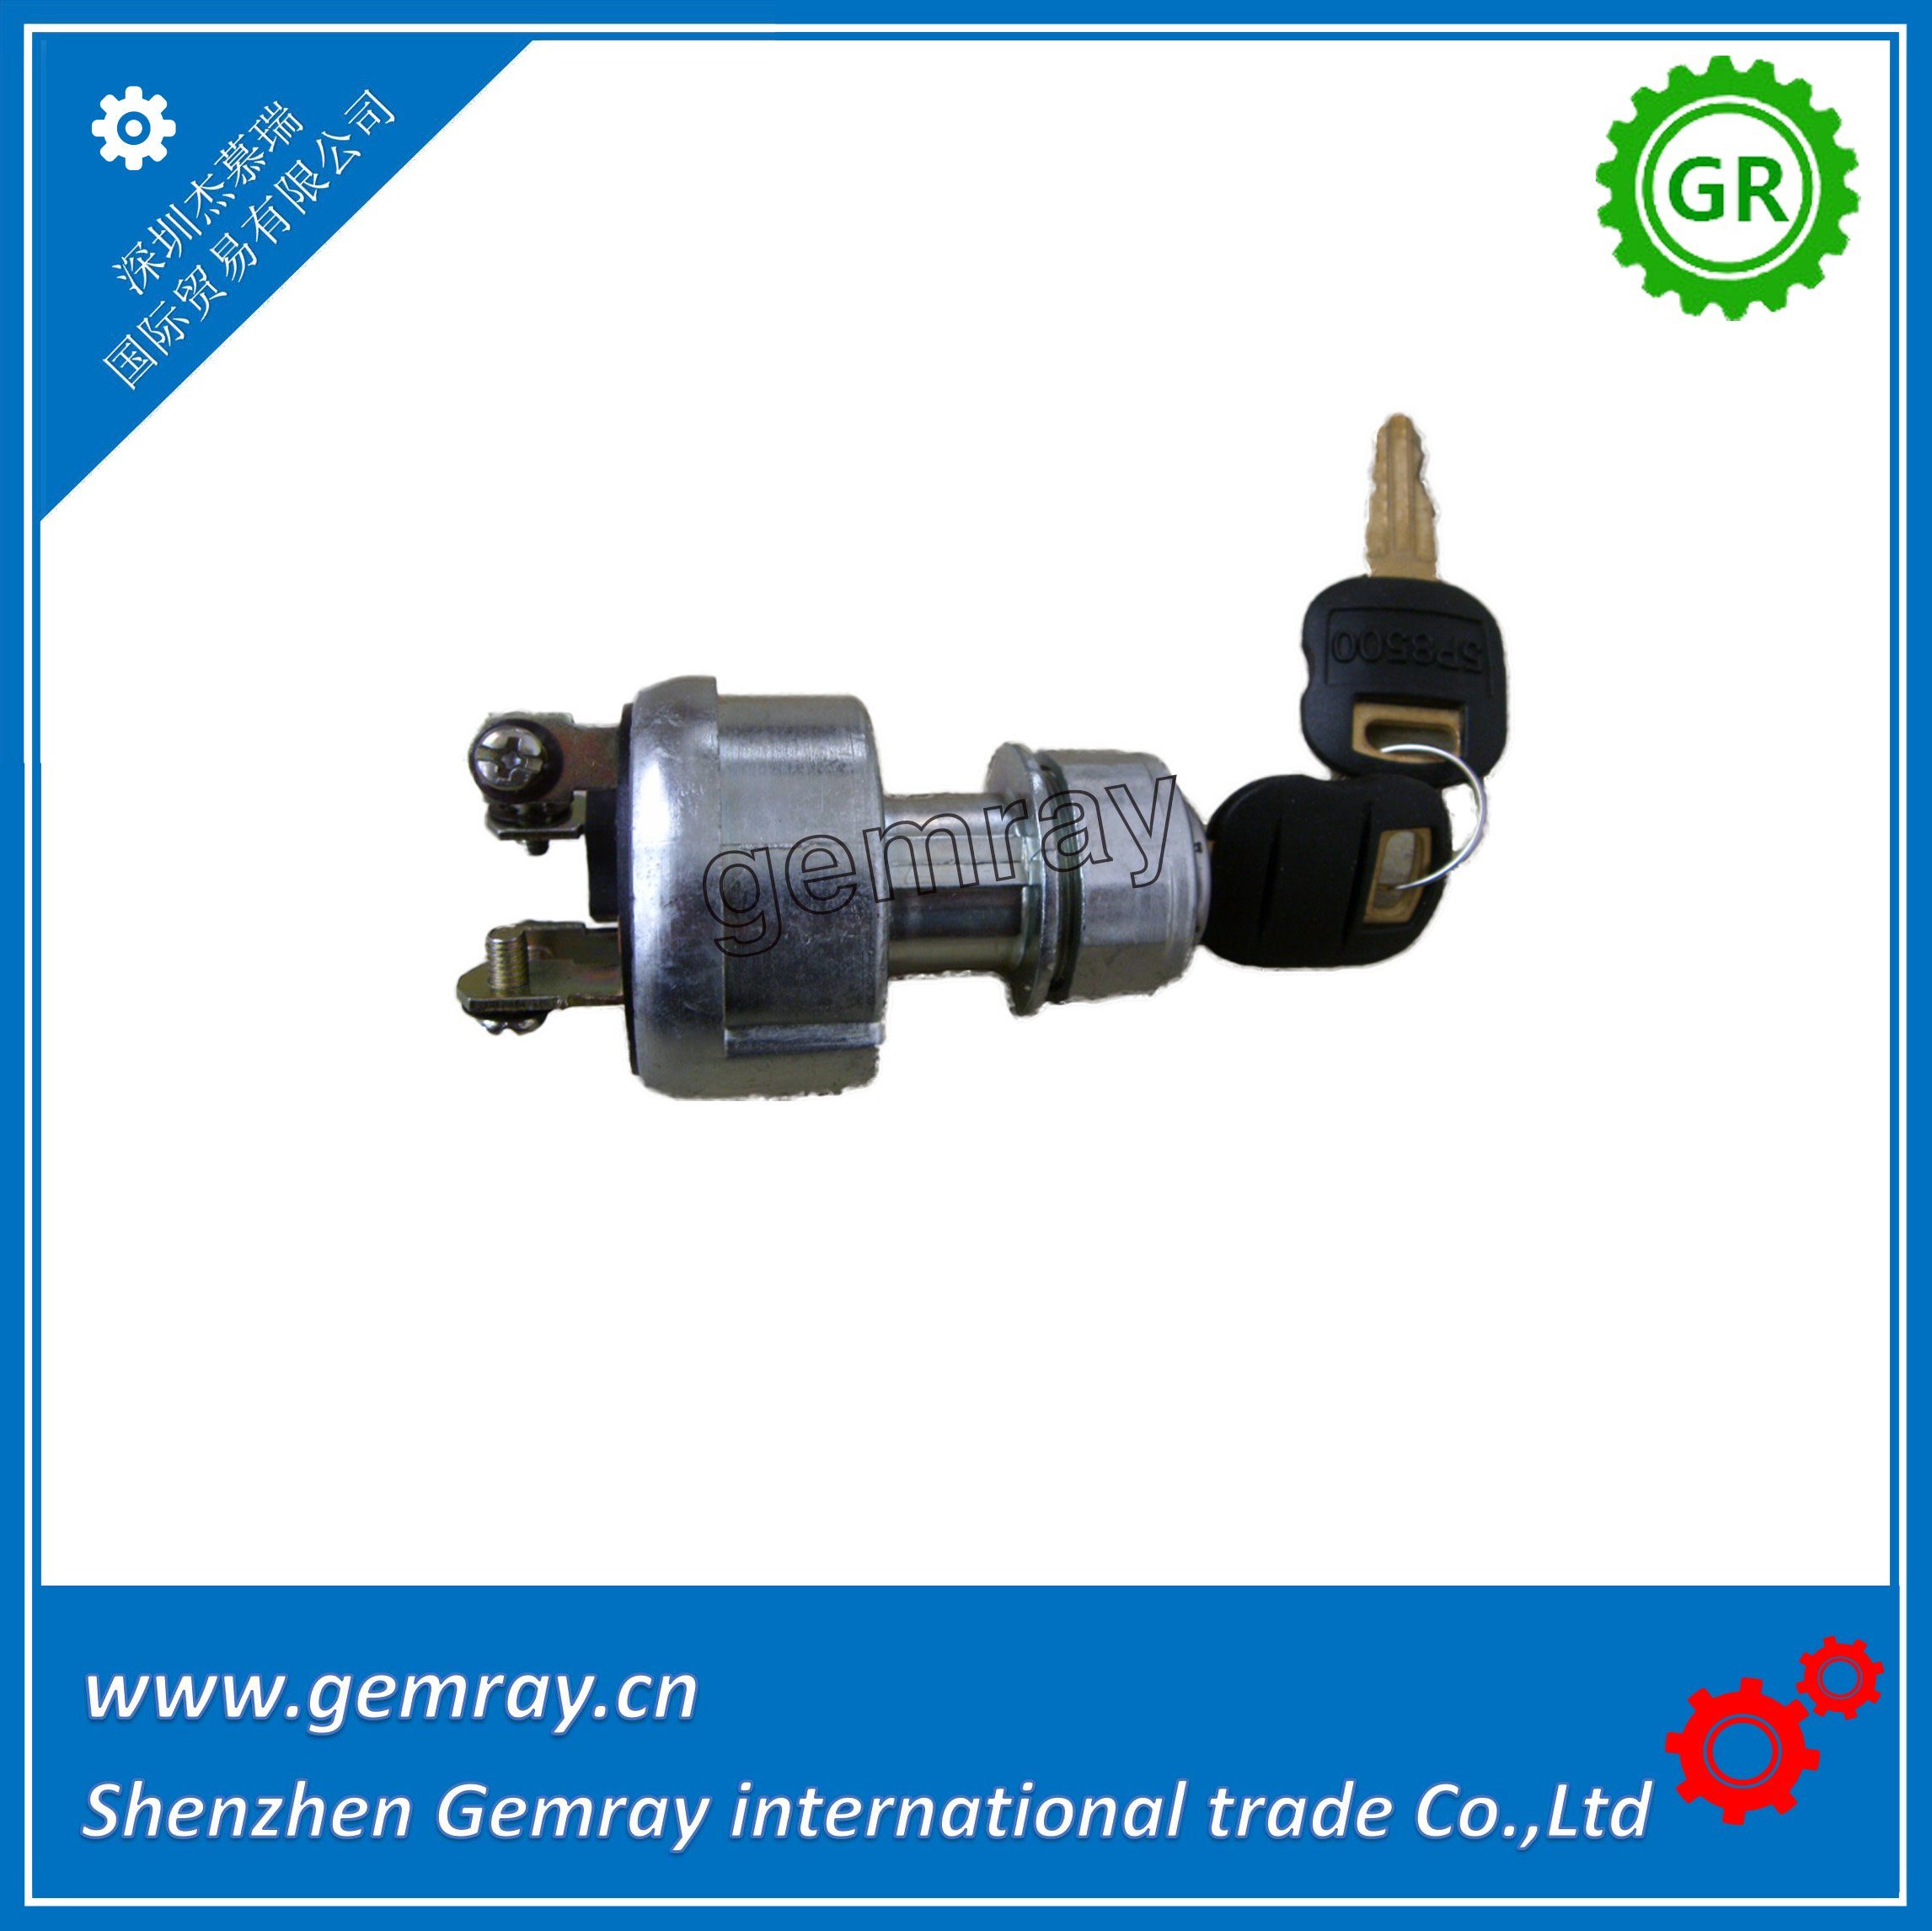 Ignition Switch 9g7641 for Excavator E320c Spare Parts